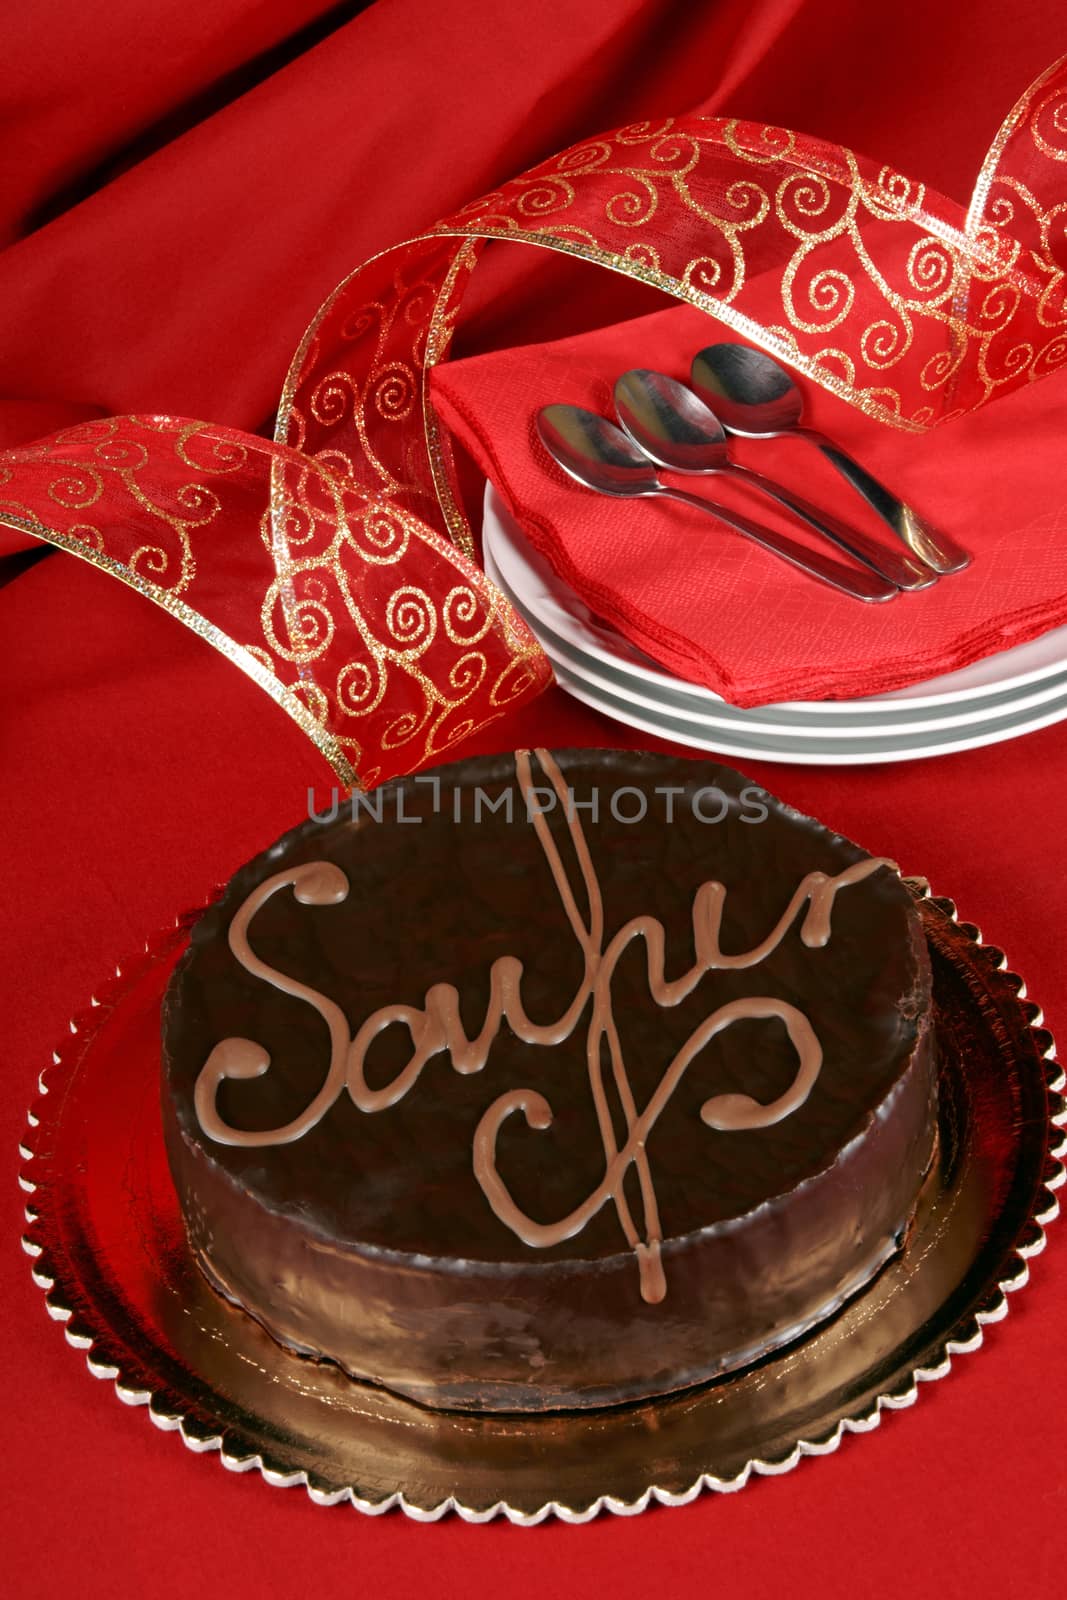 Famous austrian chocolate cake called sacher torte served on a golden plate. Selective focus.